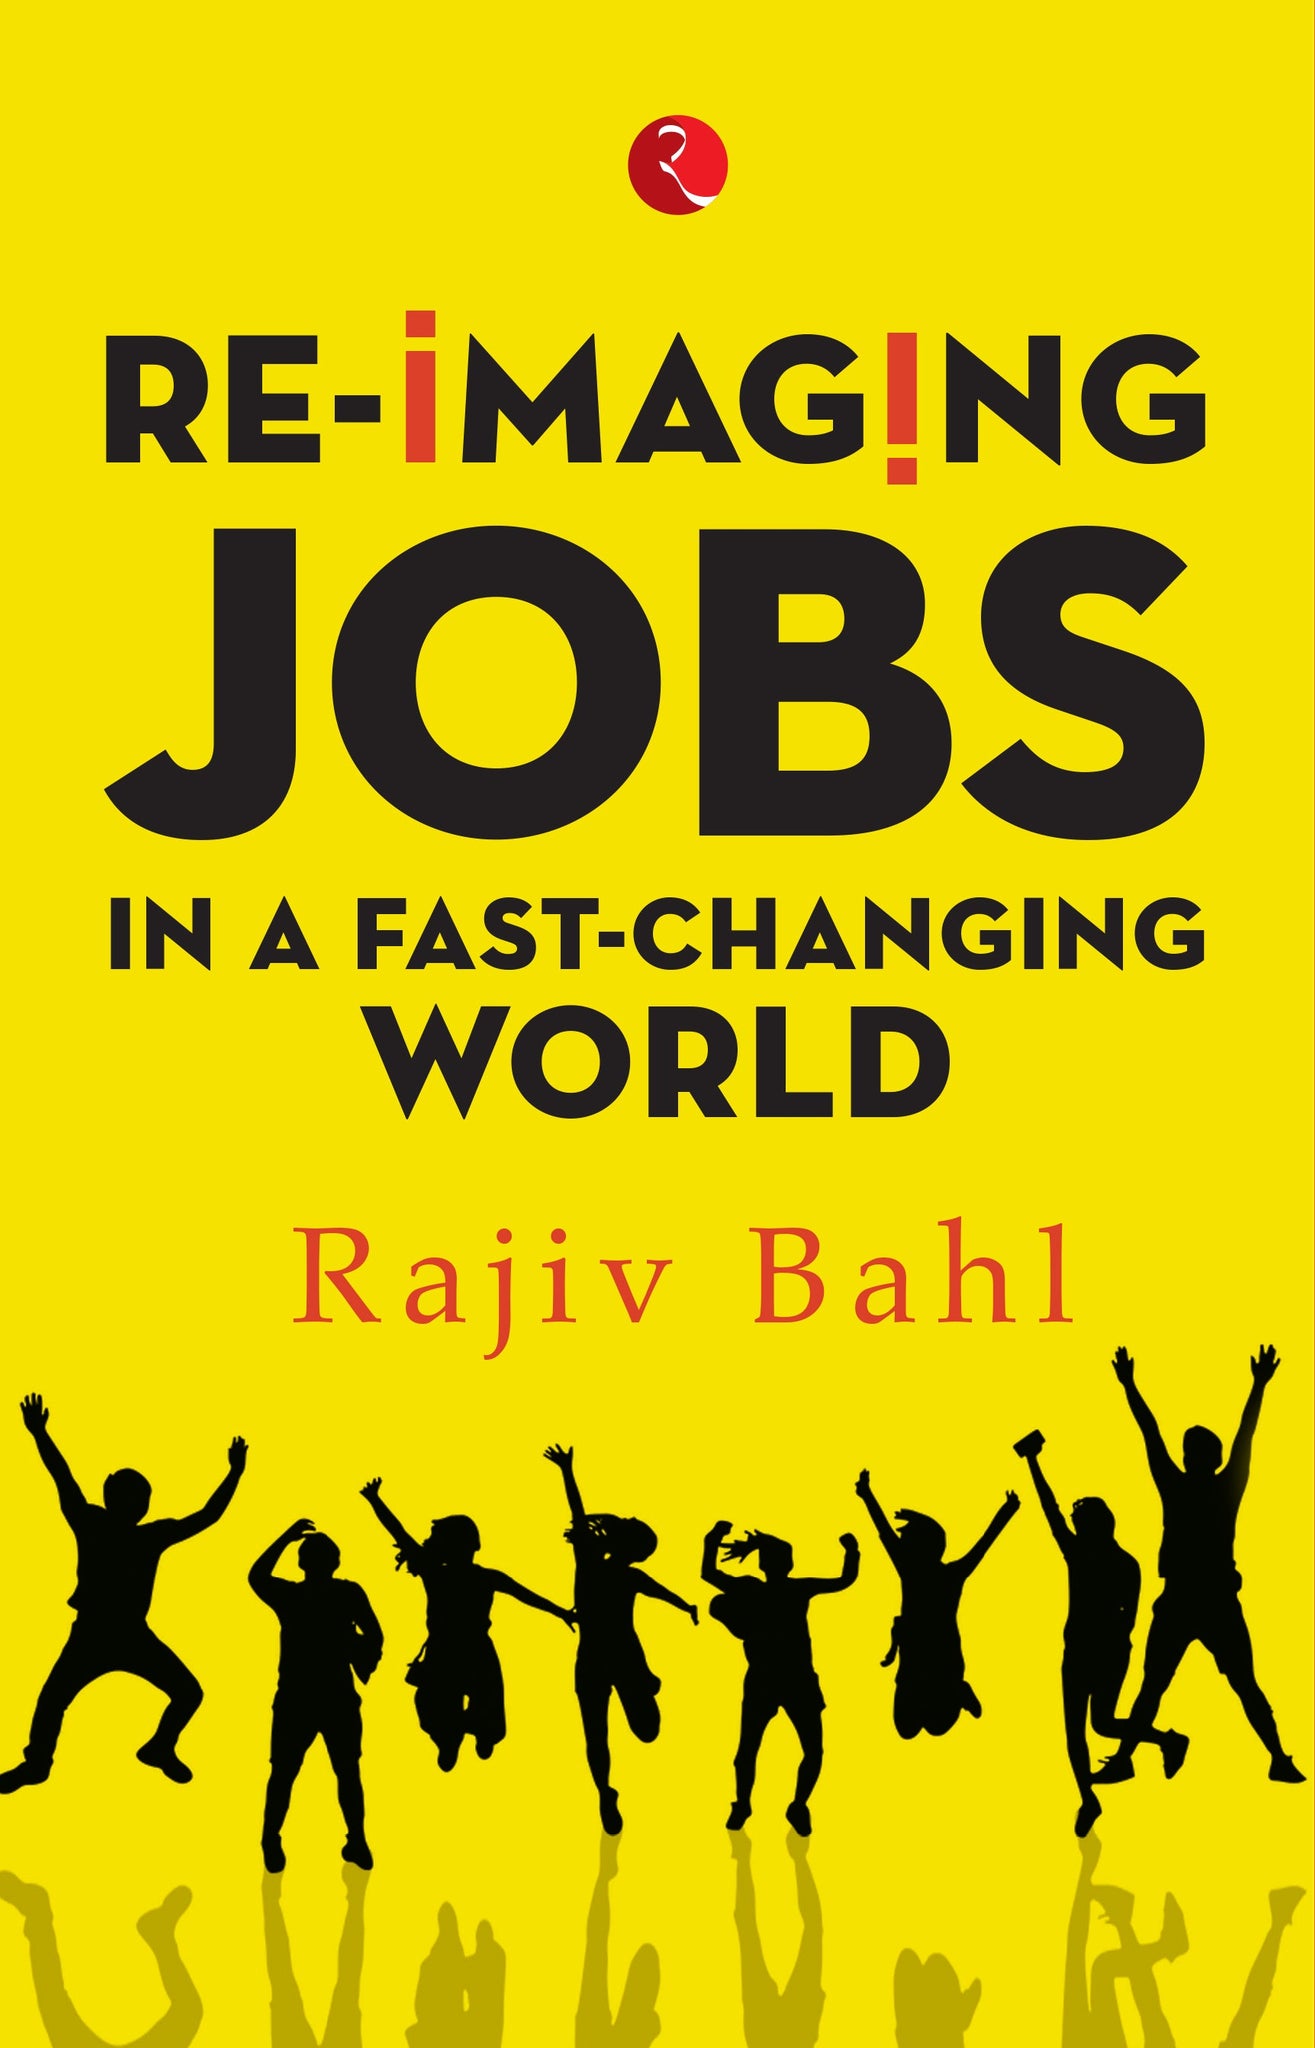 RE-IMAGINING JOBS IN A FAST CHANGING WORLD (HB)